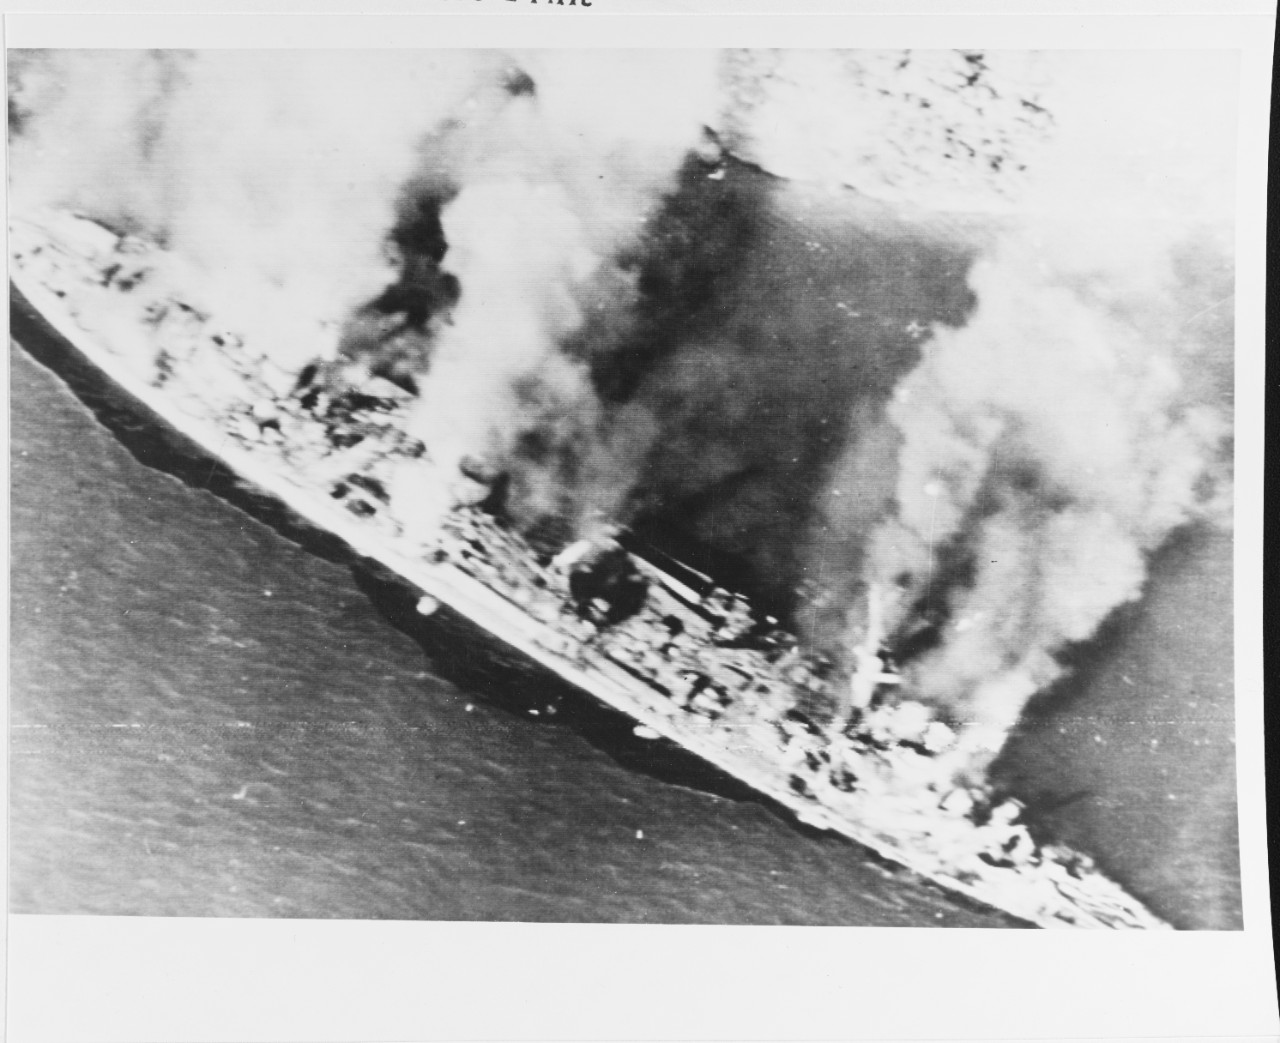 Carrier strikes in the Palau Islands, March 1944